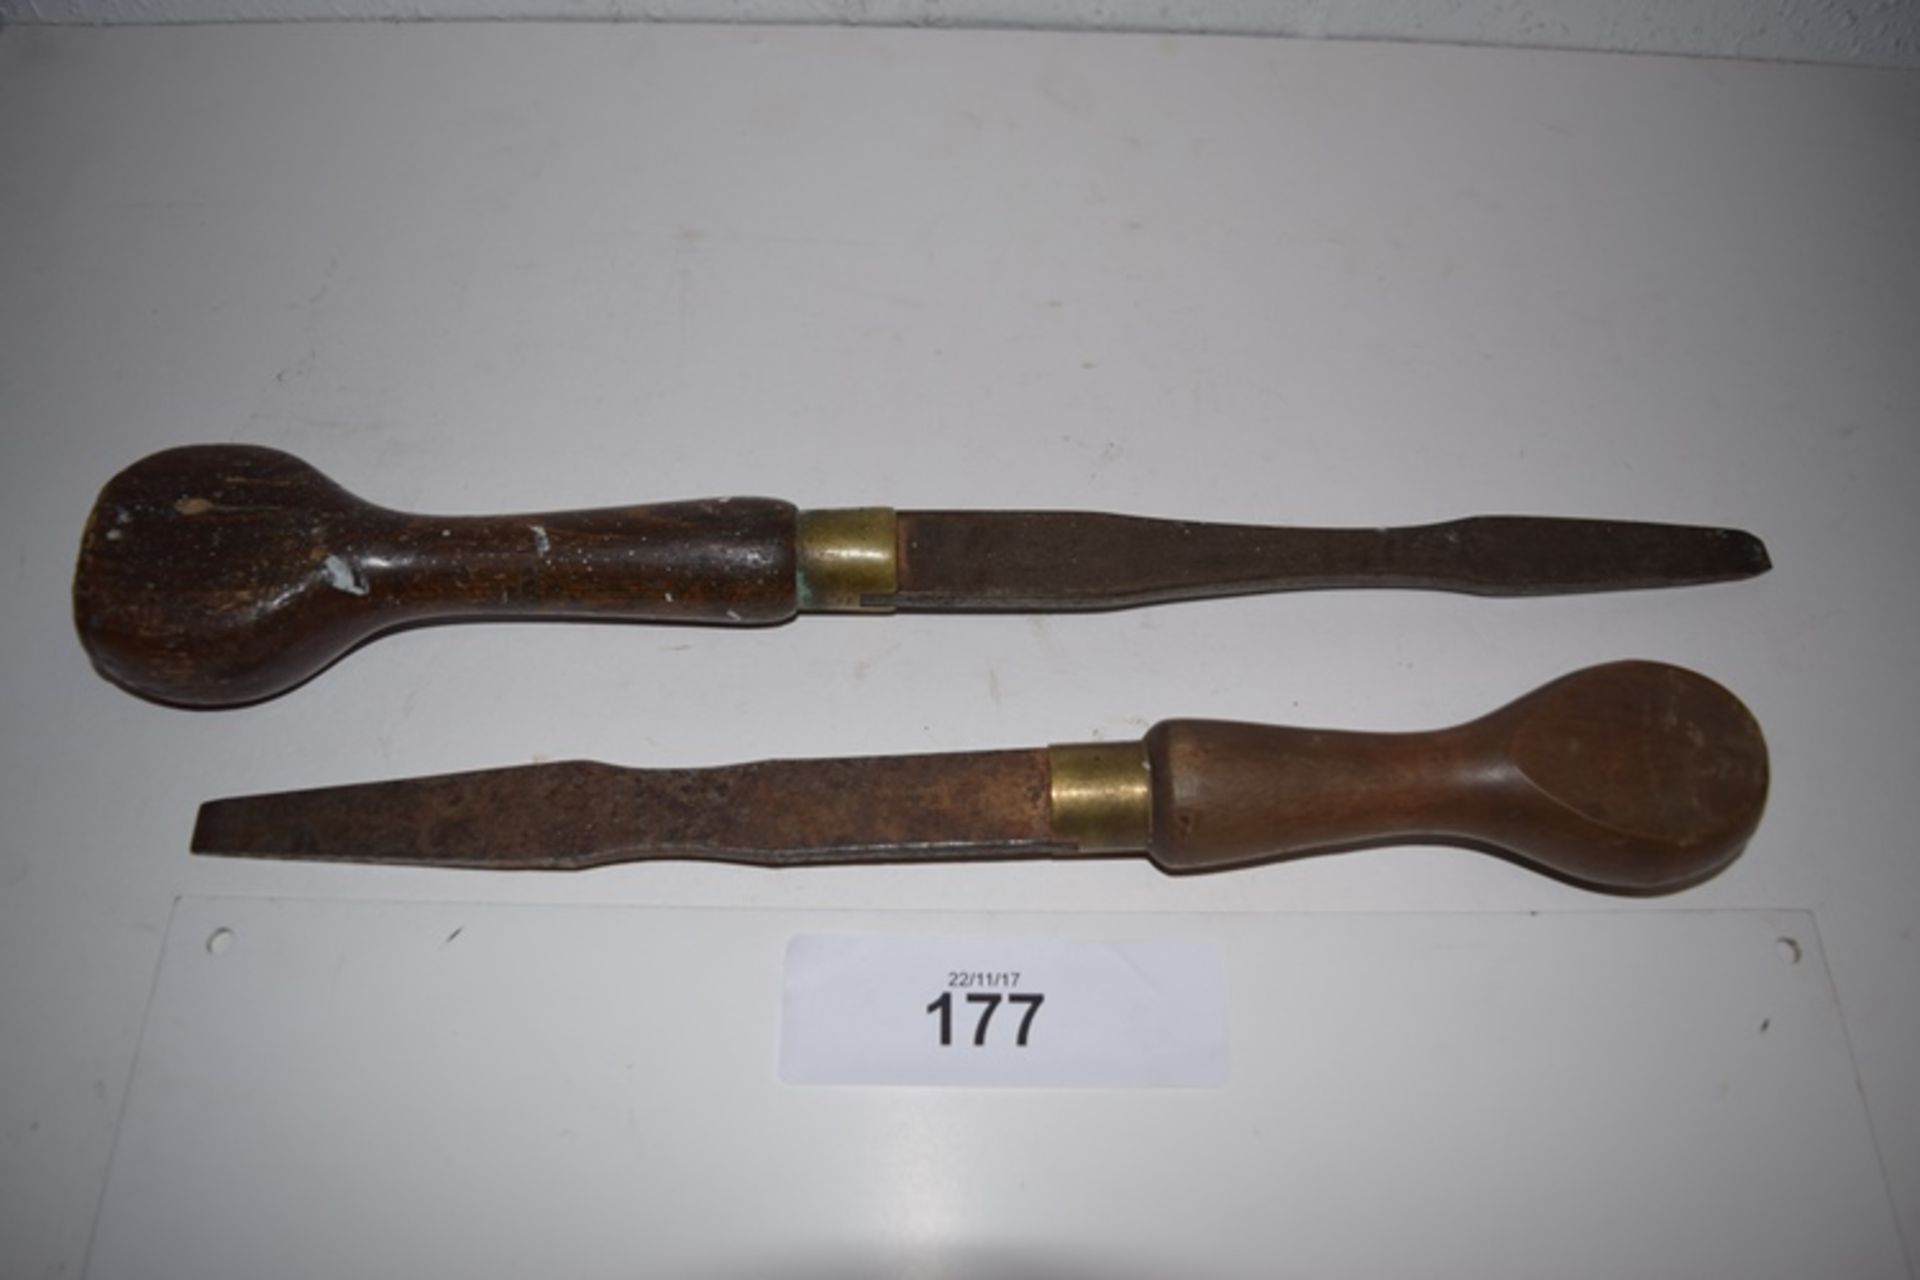 2 x London pattern screwdrivers, one stamped Gillett and the other stamped Clay Sheffield